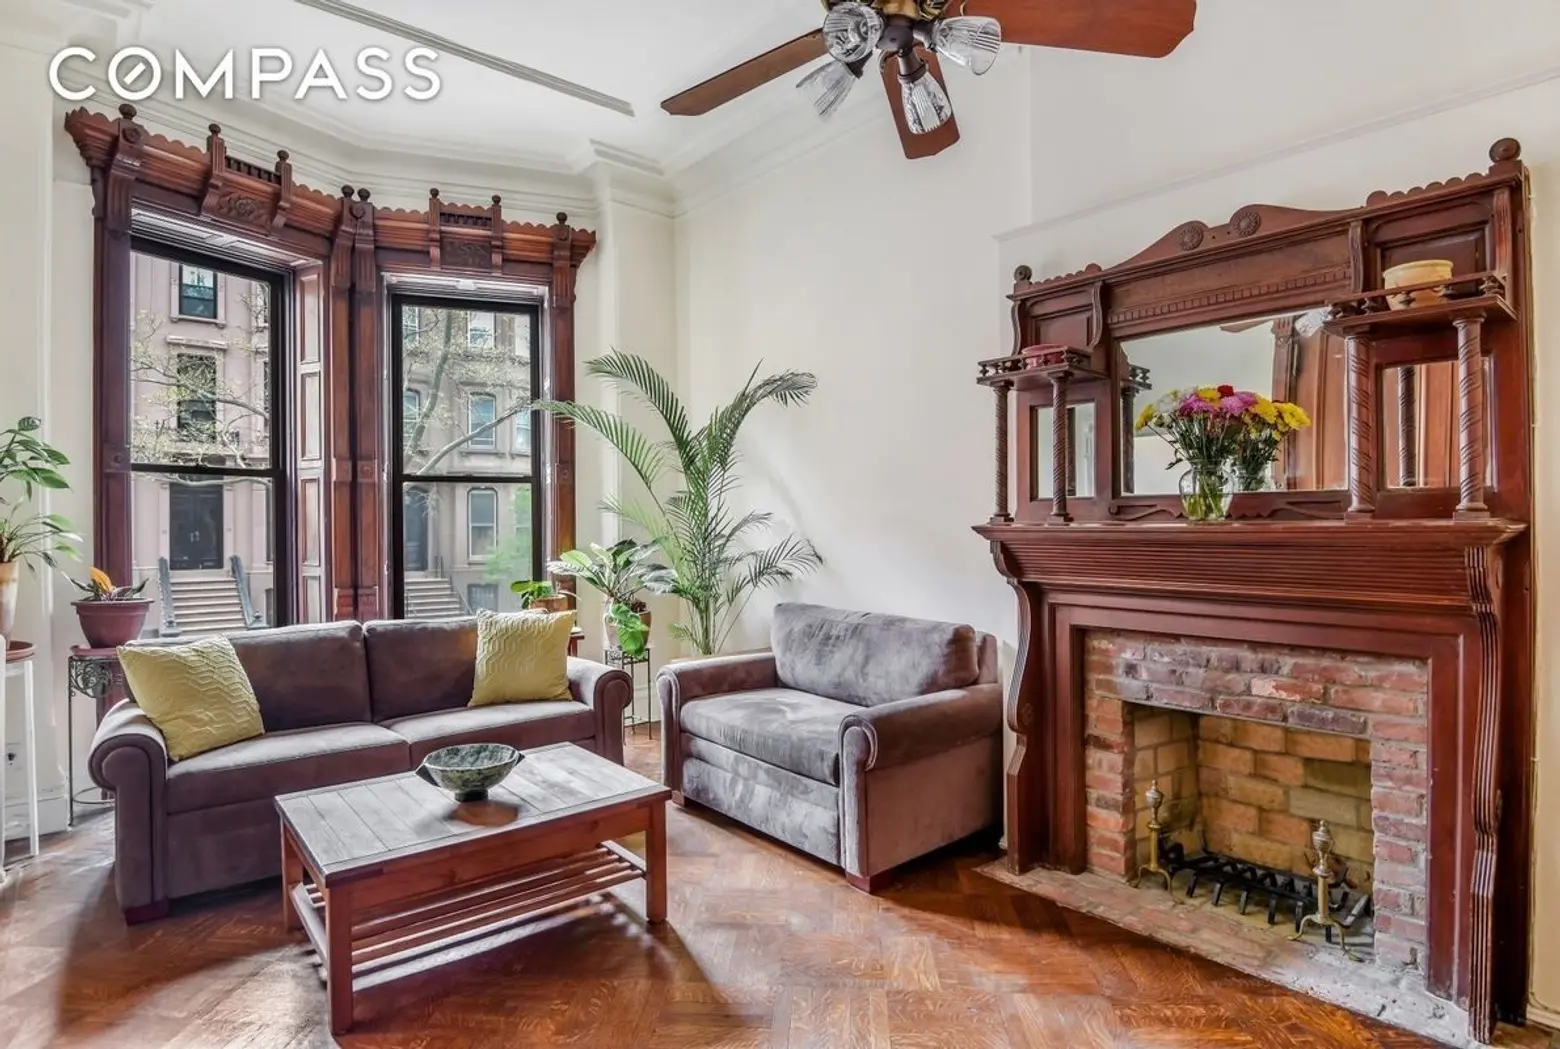 Parlor floor of an 1800s Park Slope brownstone is now a $1.5M two-bedroom co-op